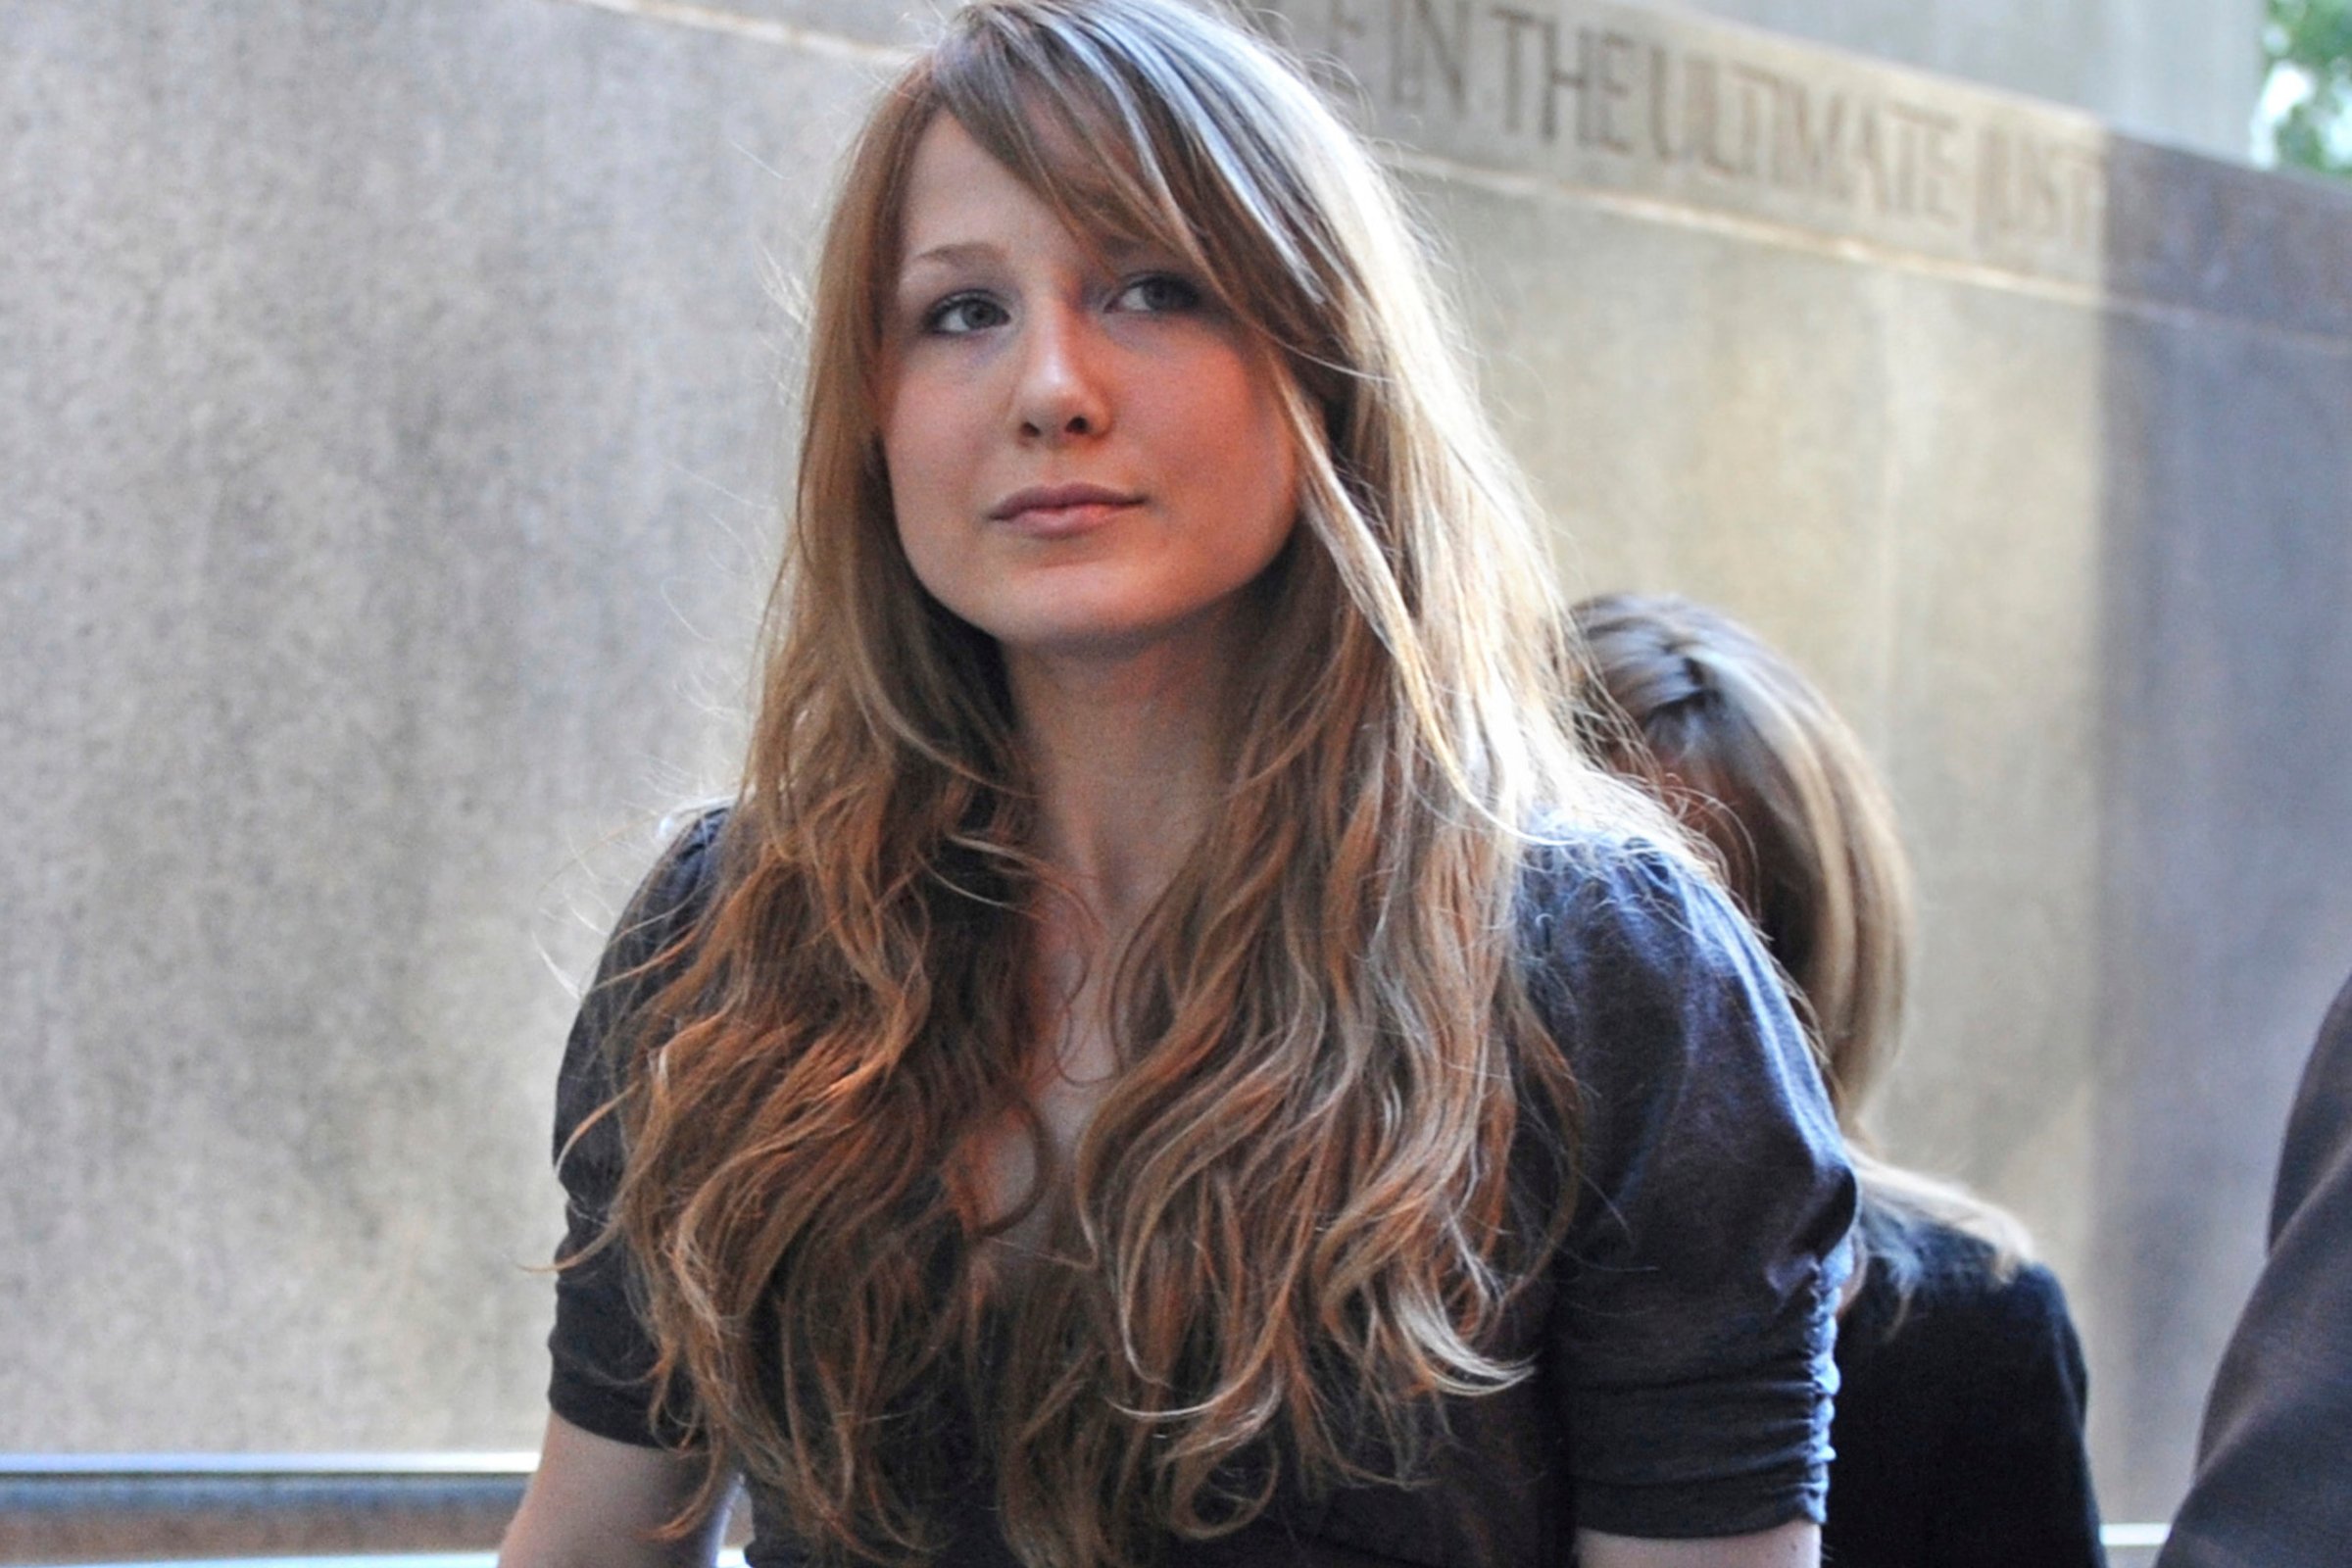 Caroline Giuliani arrives at Manhattan criminal court with her mother, Donna Hanover, in background on Aug. 31, 2010.